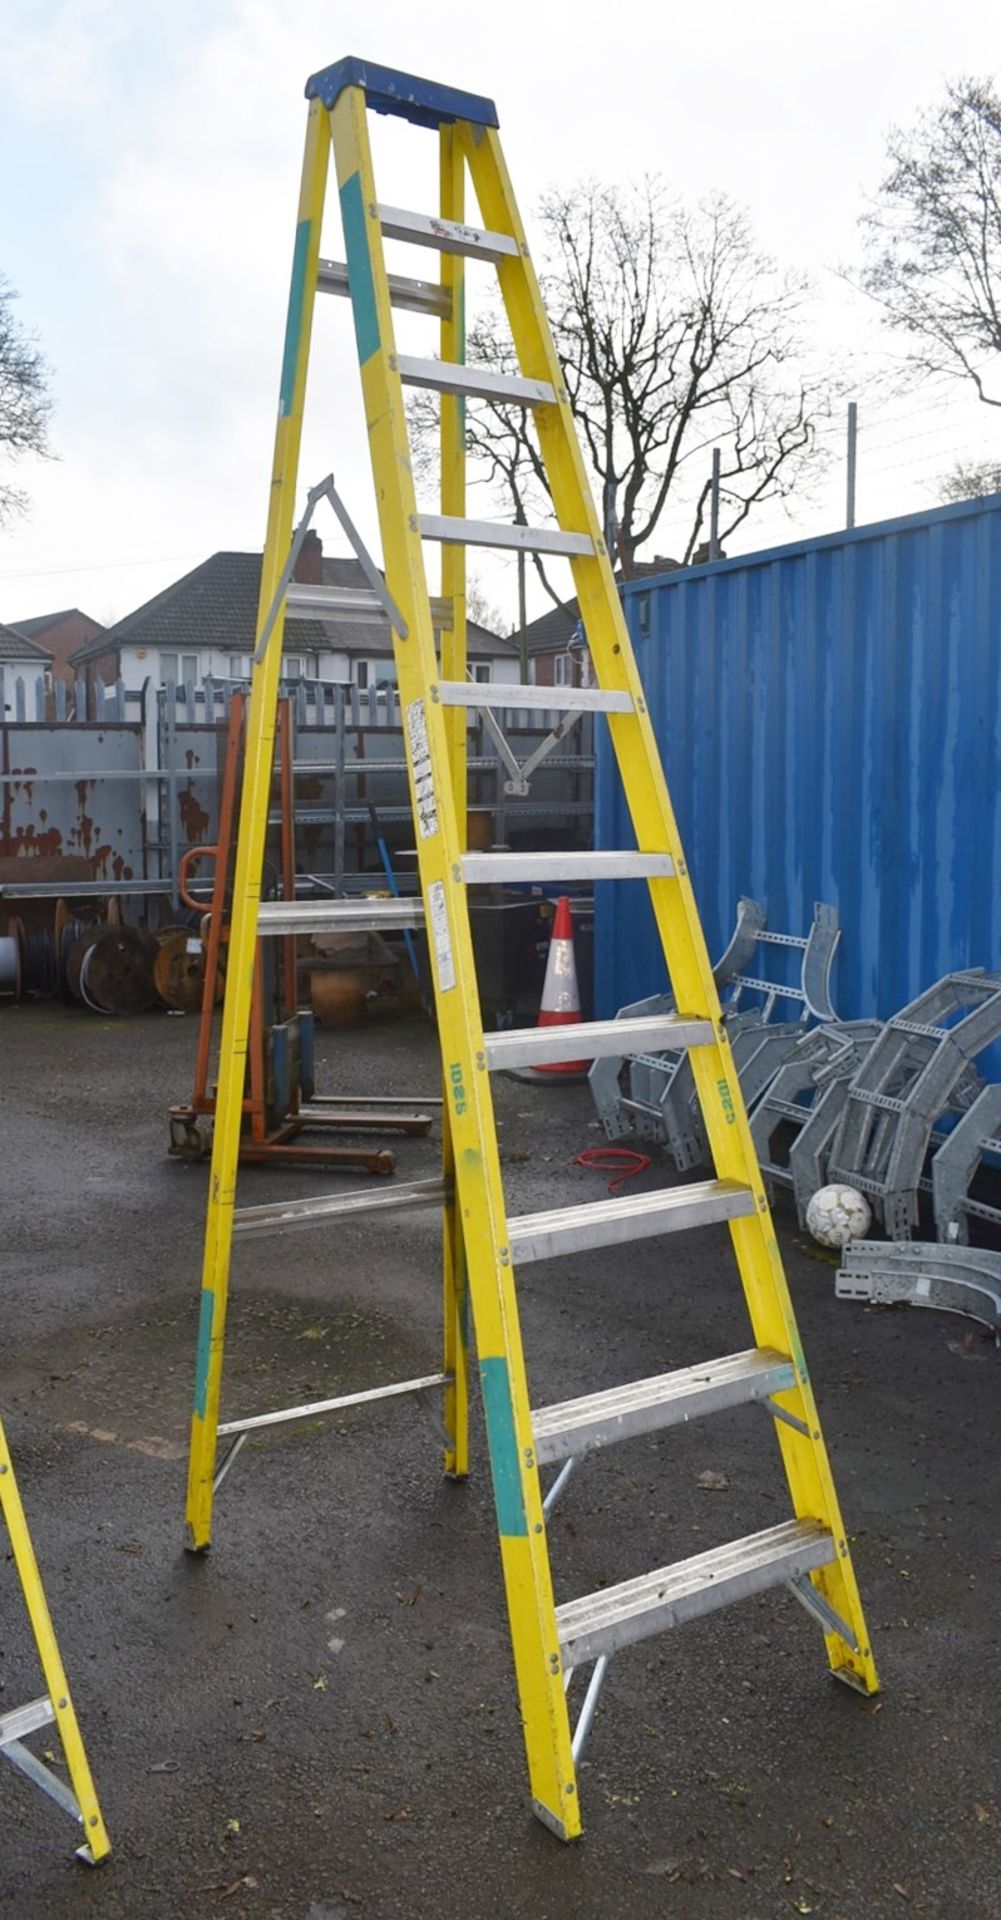 1 x Fibreglass Site Ladder With 9 Treads - Suitable For Working Around Thermal or Electrical Dangers - Image 8 of 9